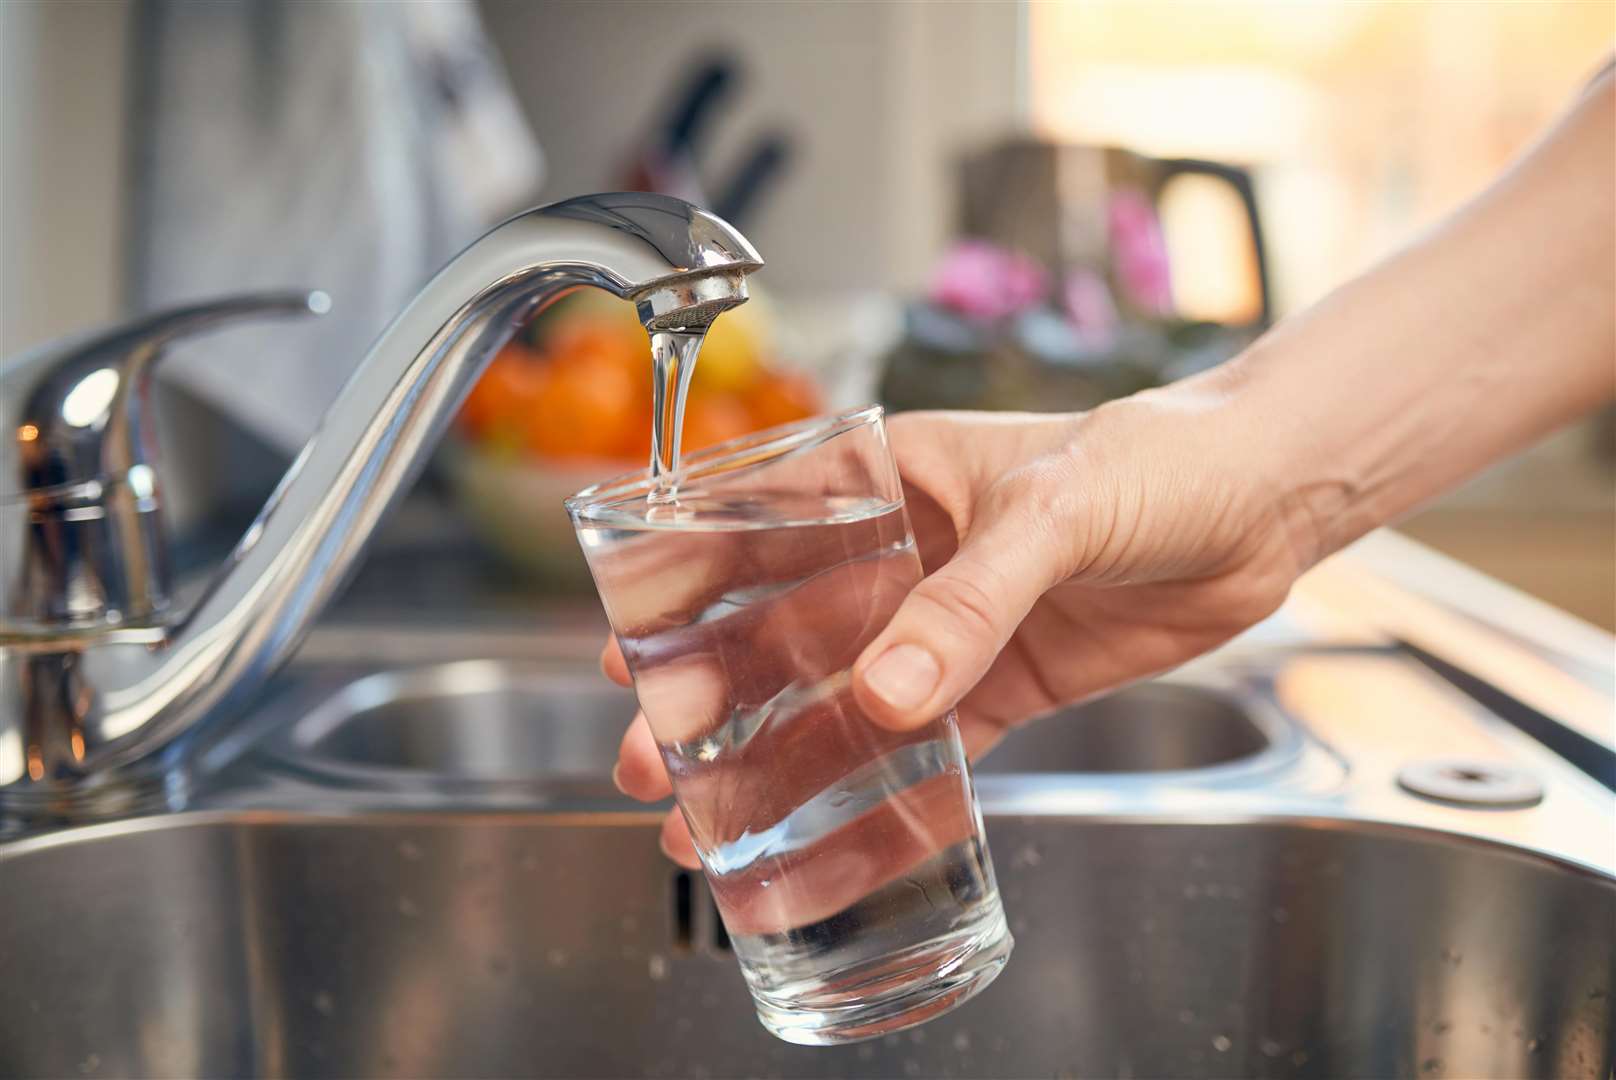 Residents in Tunbridge Wells are still reporting issues with their water supply. Picture: iStock.